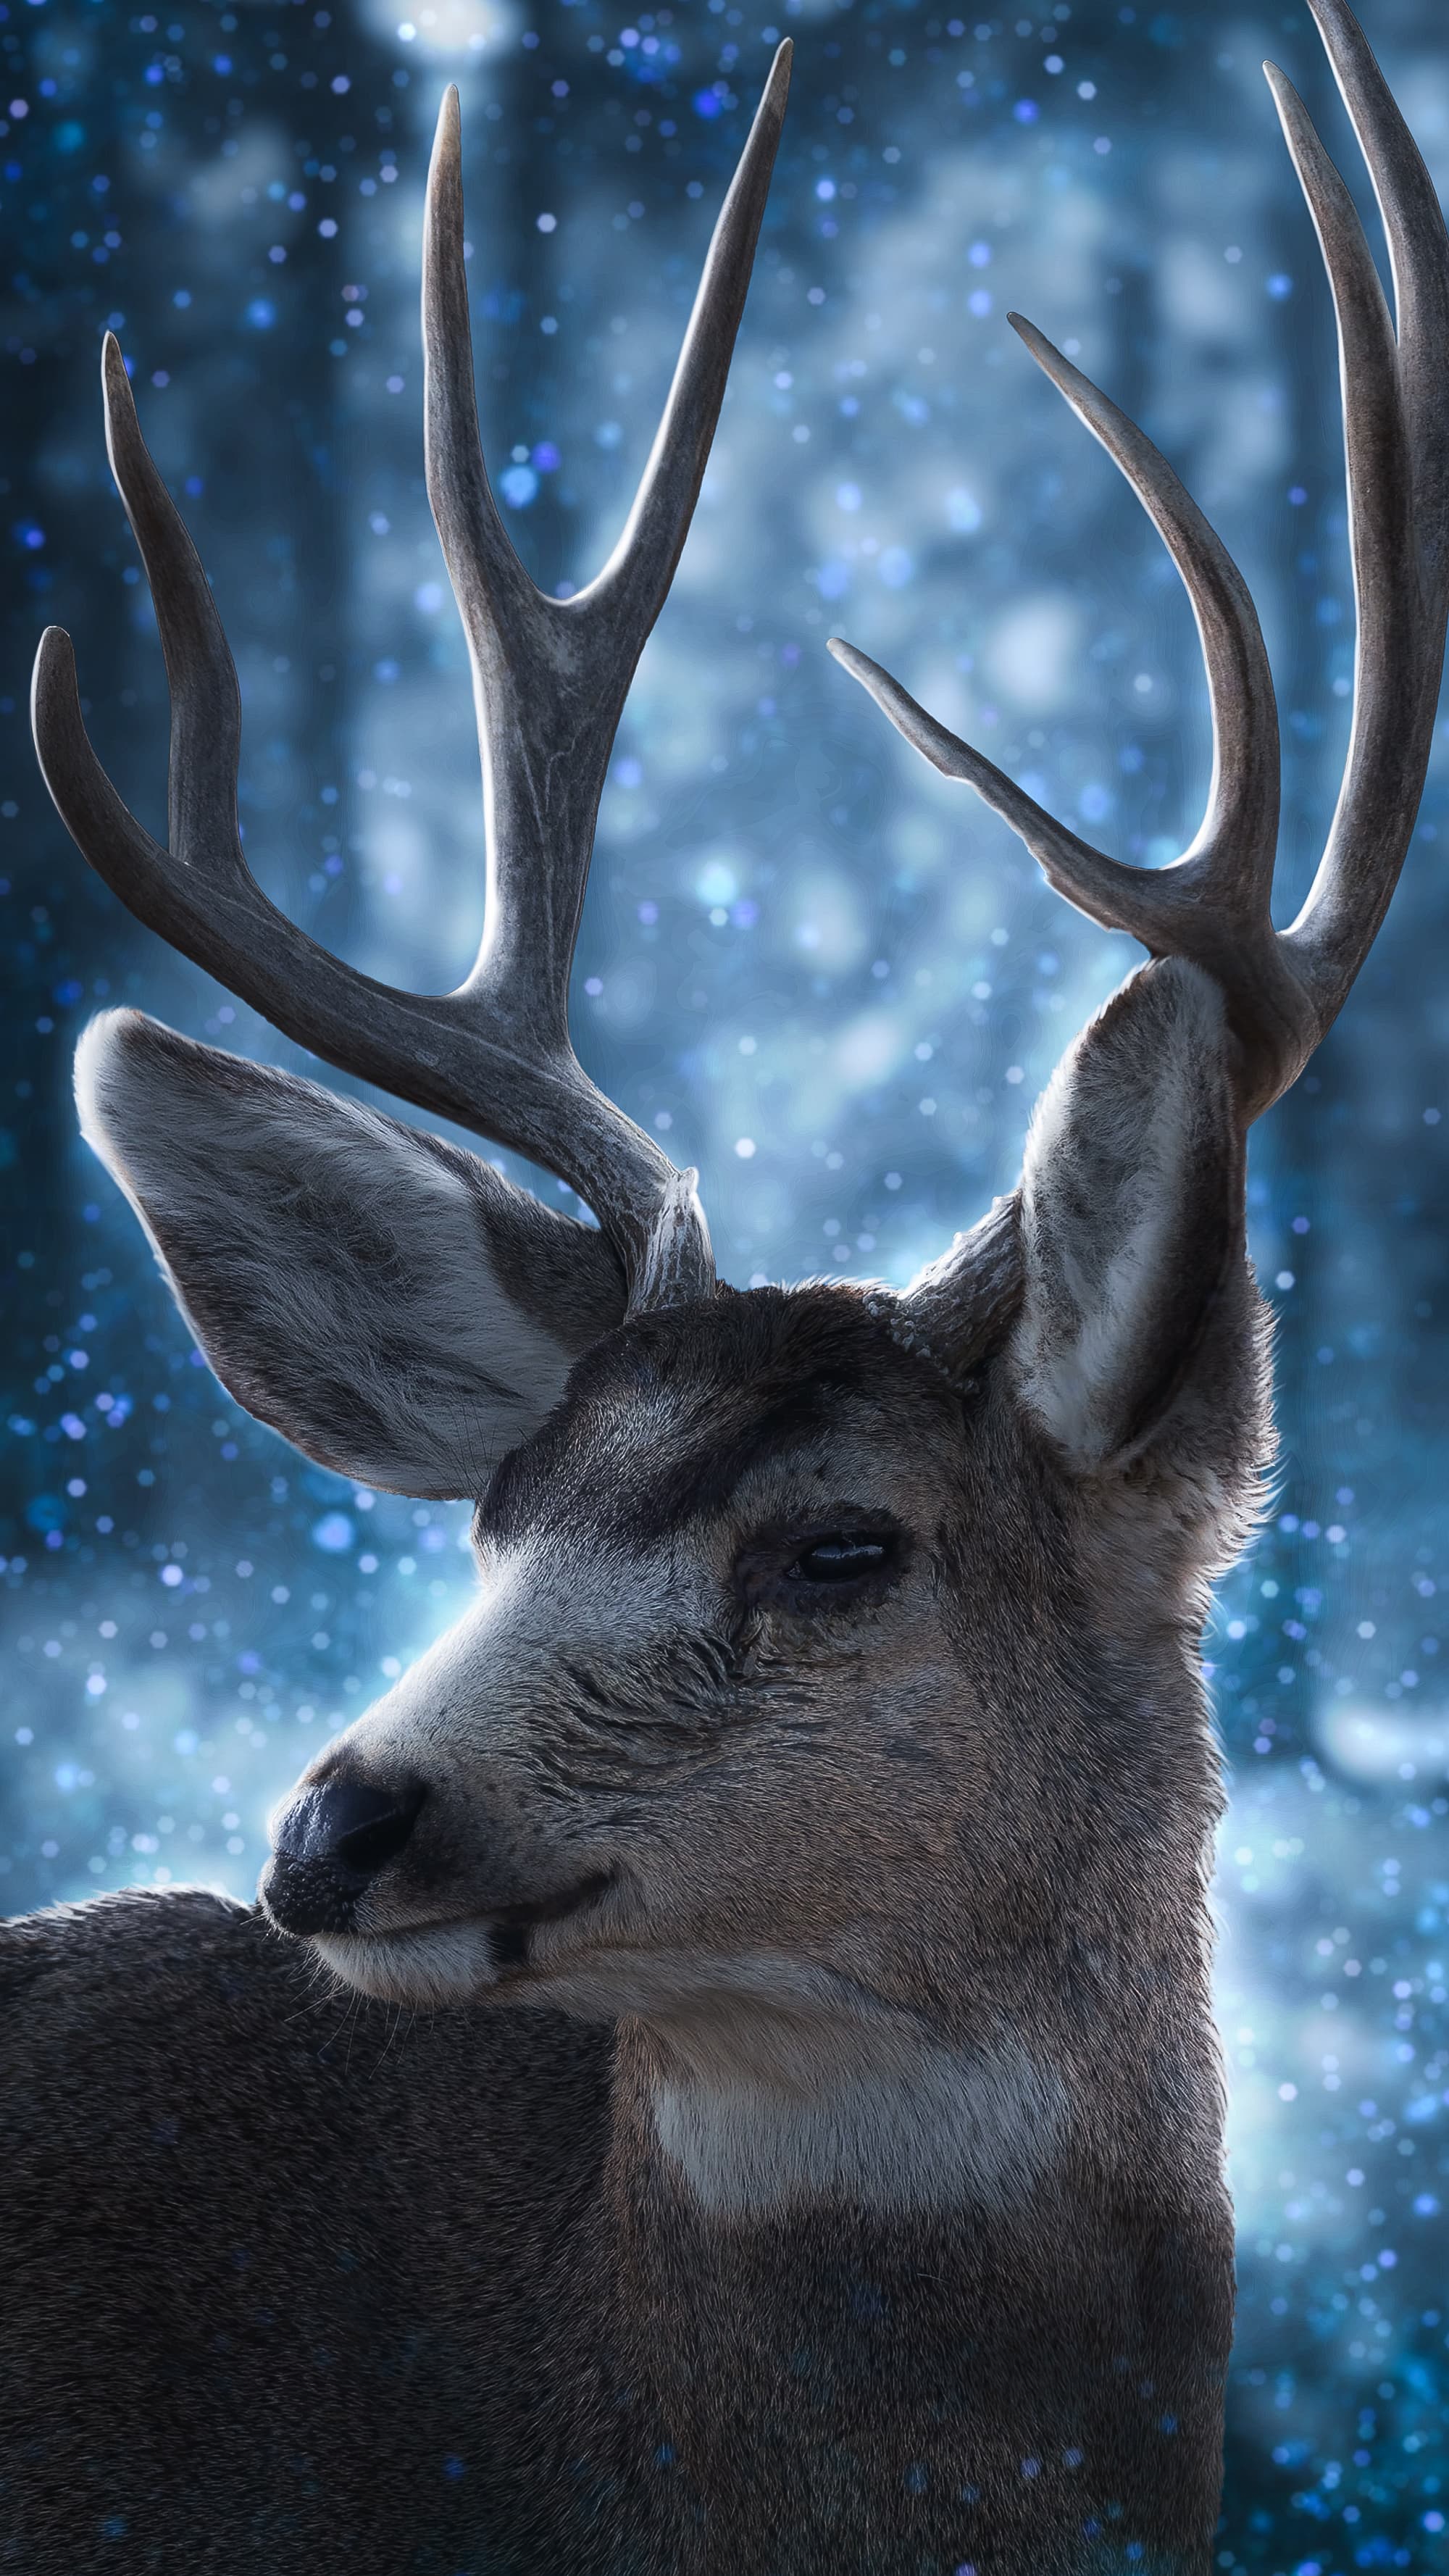 Magical Forest Deer HD Wallpaper for Mobile